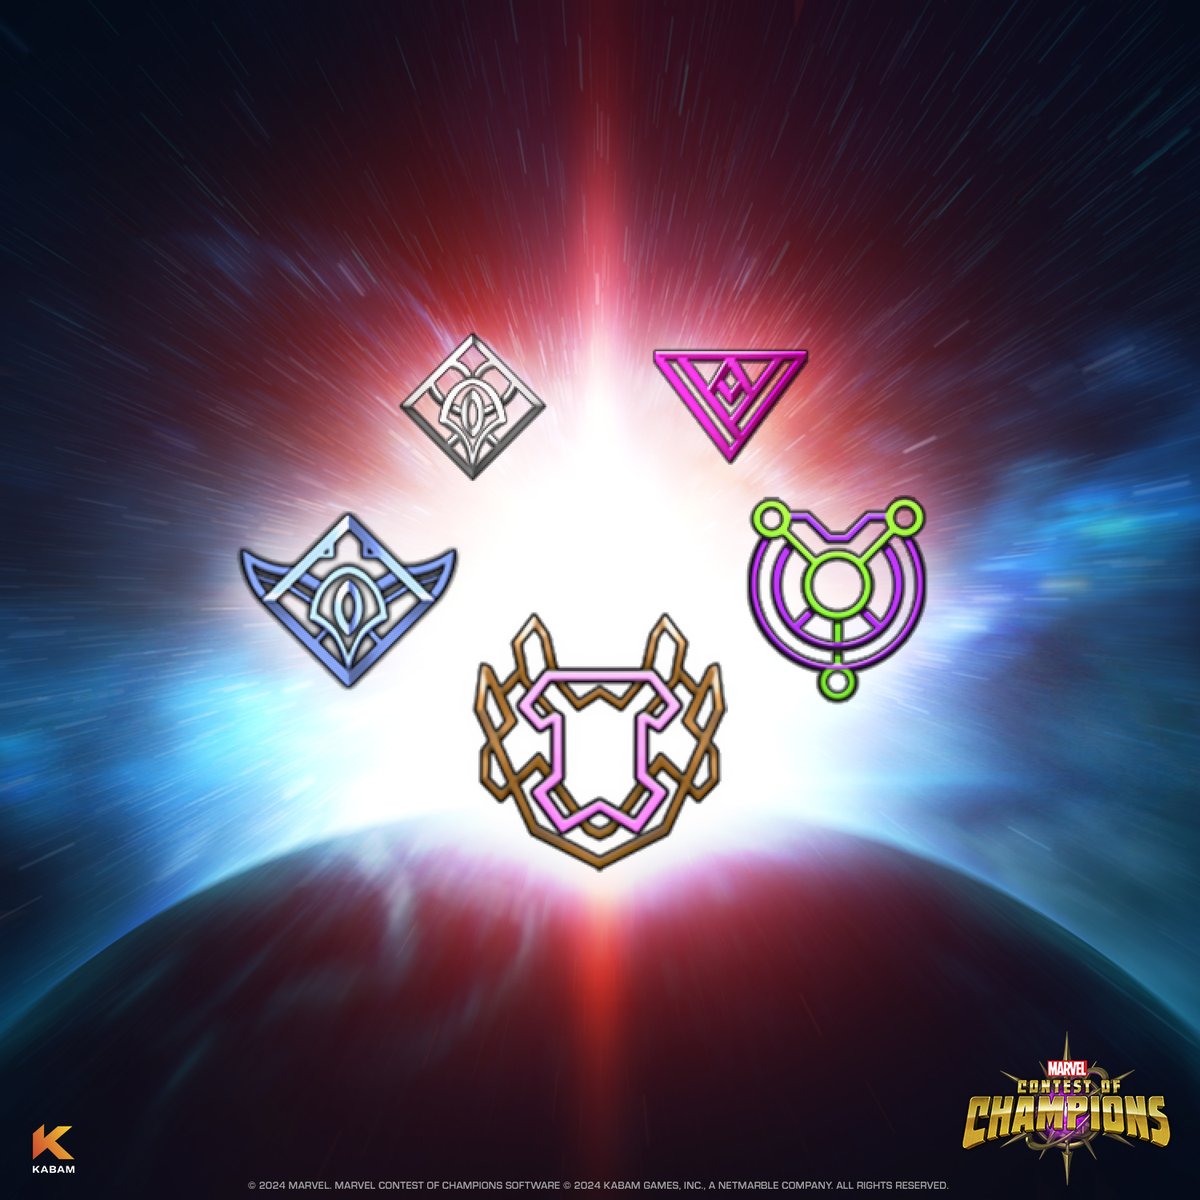 Introducing: Alternative Progression Unlocks. For those that have a growing roster of powerful Champions, but unable to beat certain Bosses, you can now bypass our traditional story-based gates by achieving specific roster progression milestones.